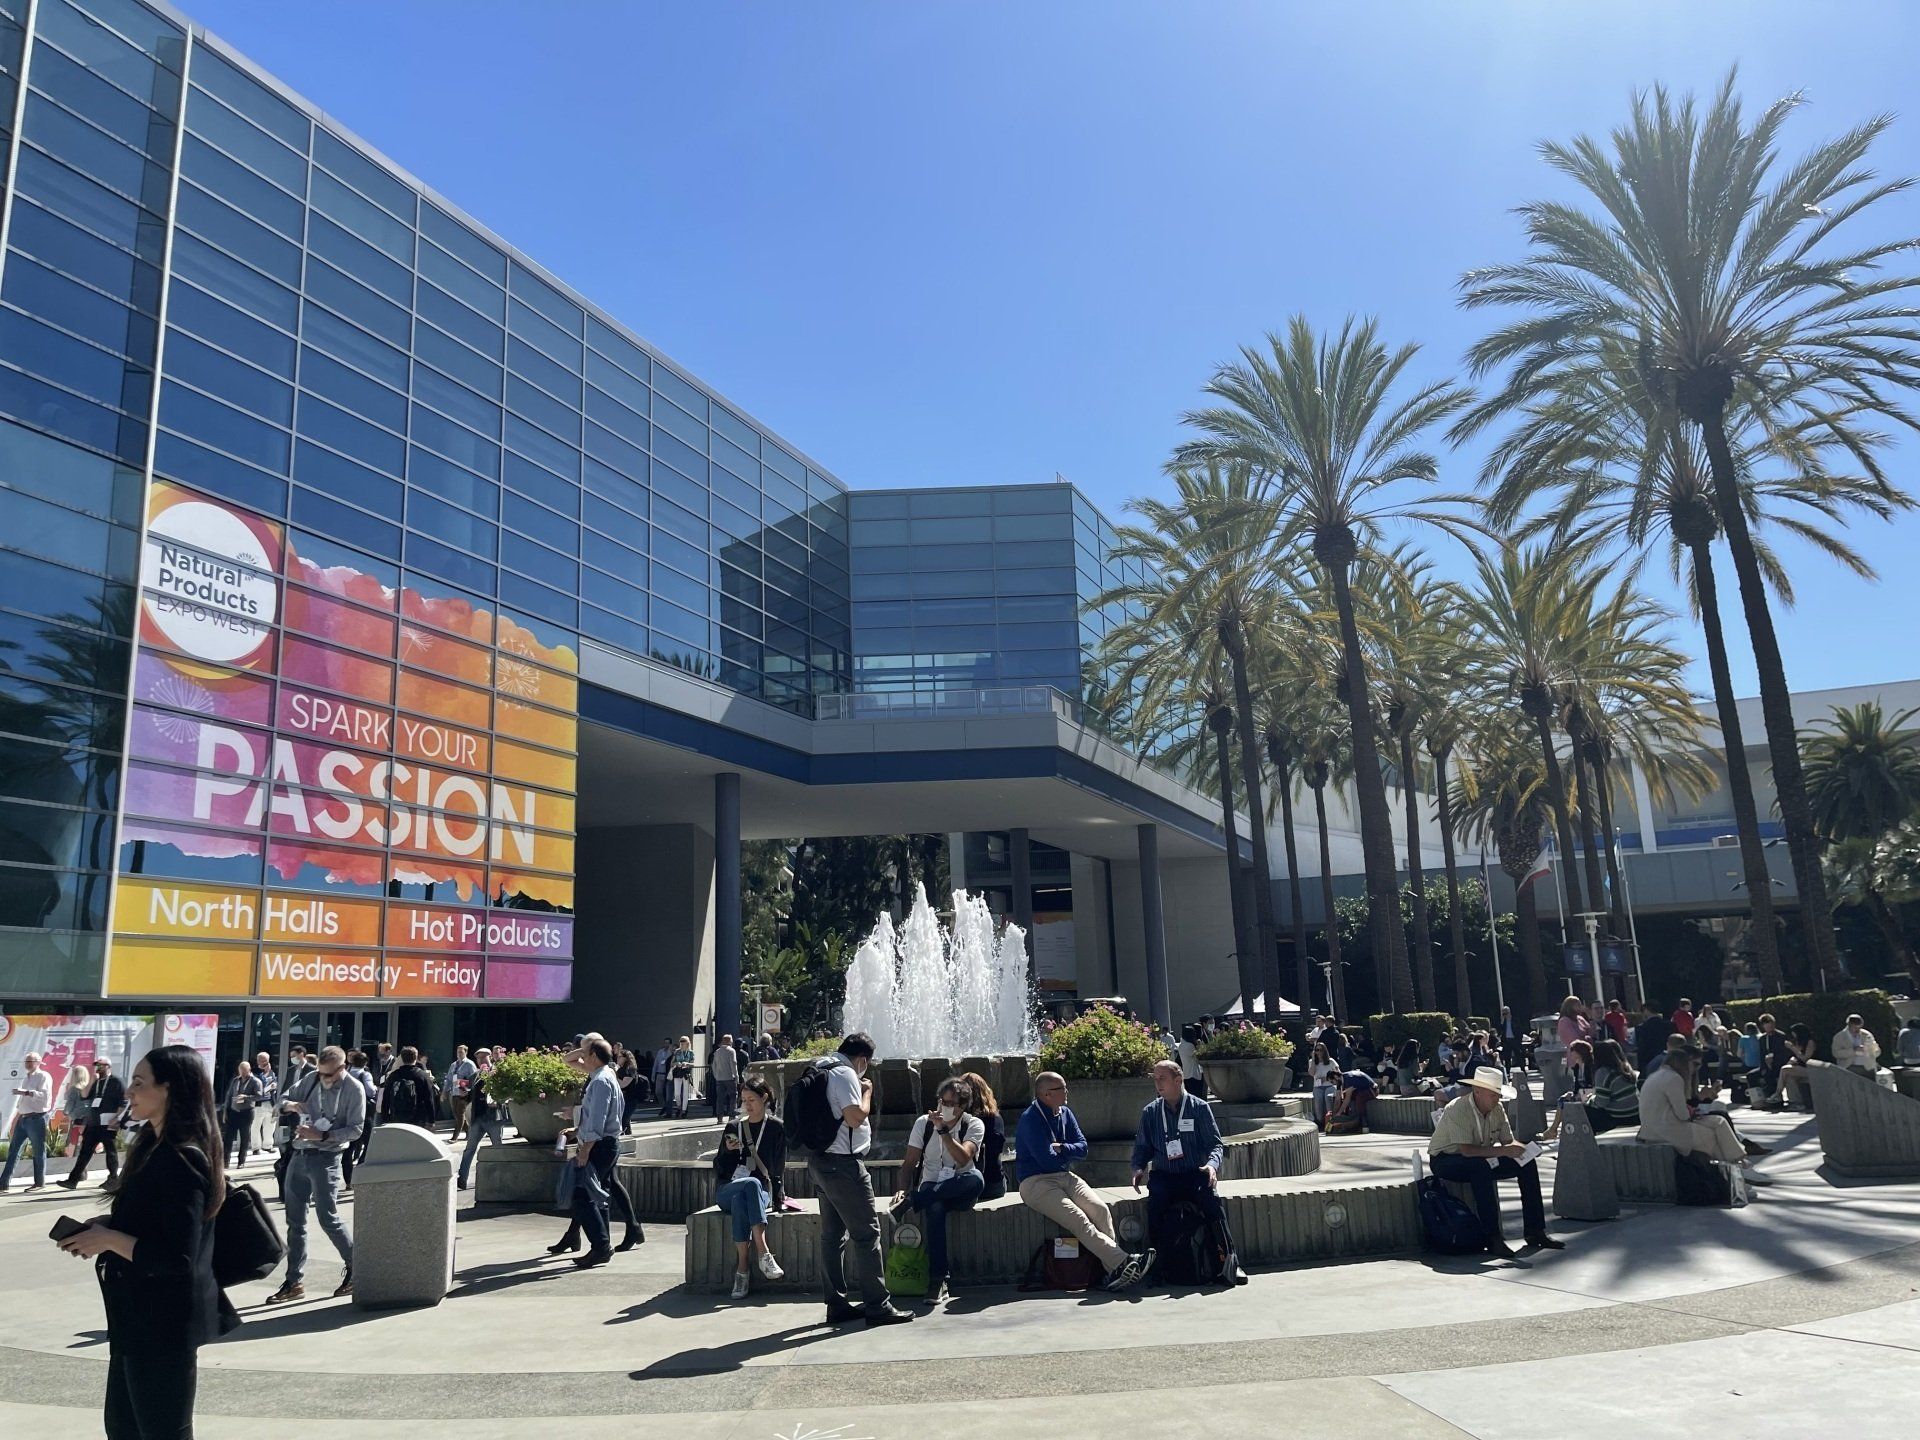 Image of people outside a building hosting Natural Products Expo West, with palm trees